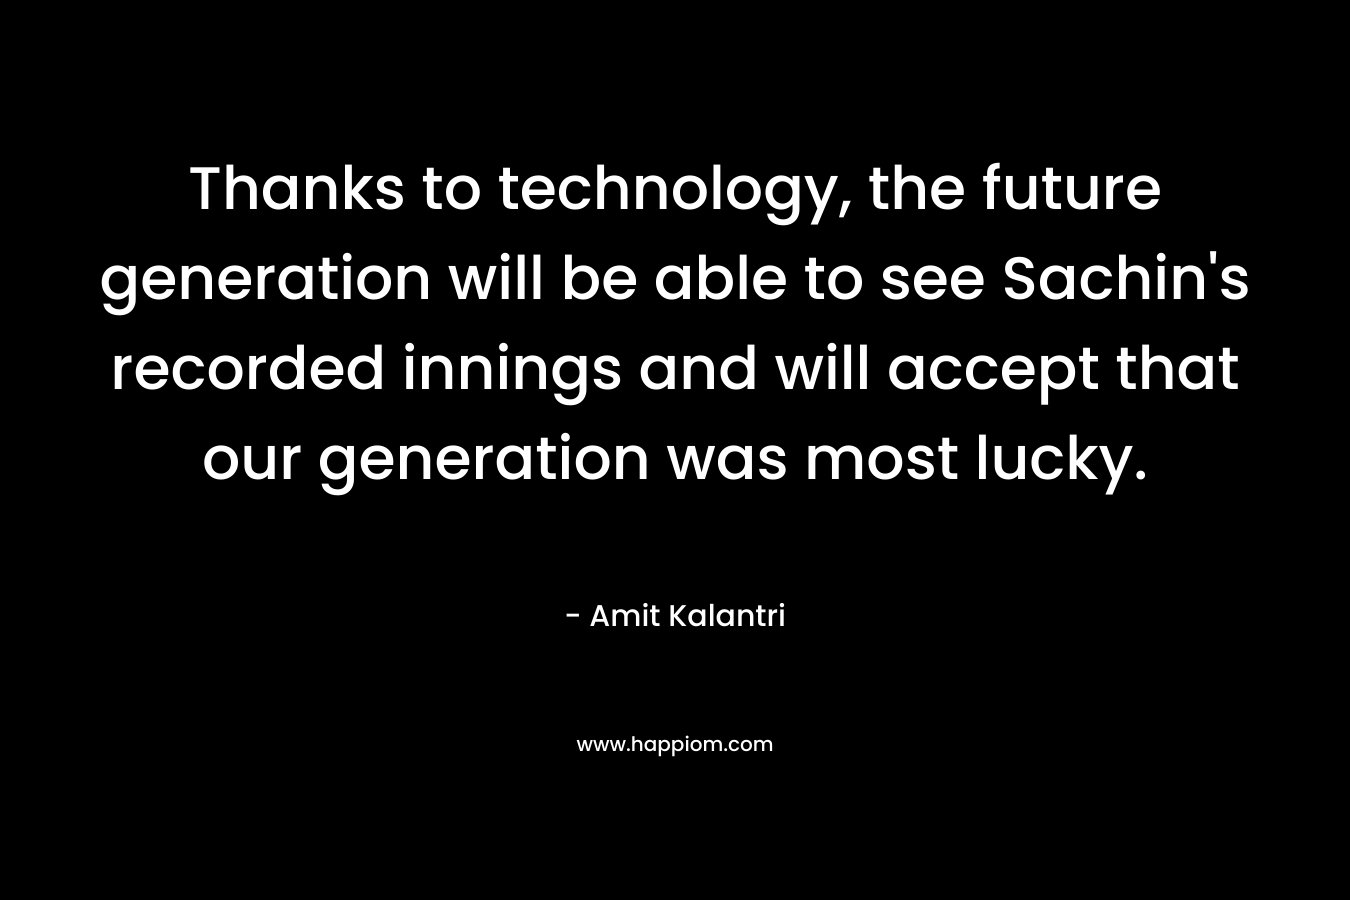 Thanks to technology, the future generation will be able to see Sachin's recorded innings and will accept that our generation was most lucky.